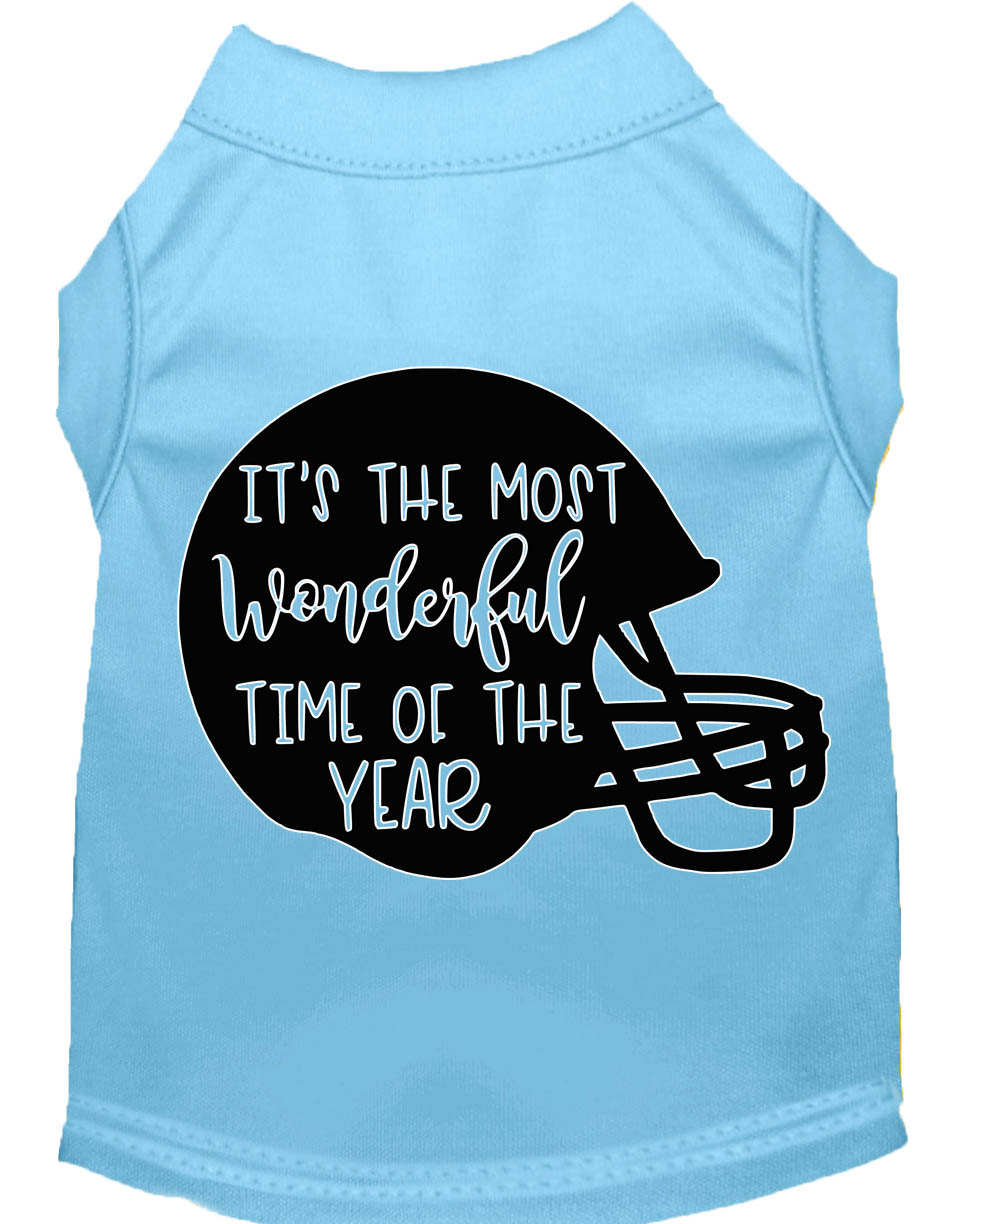 Most Wonderful Time of the Year (Football) Screen Print Dog Shirt Baby Blue Lg